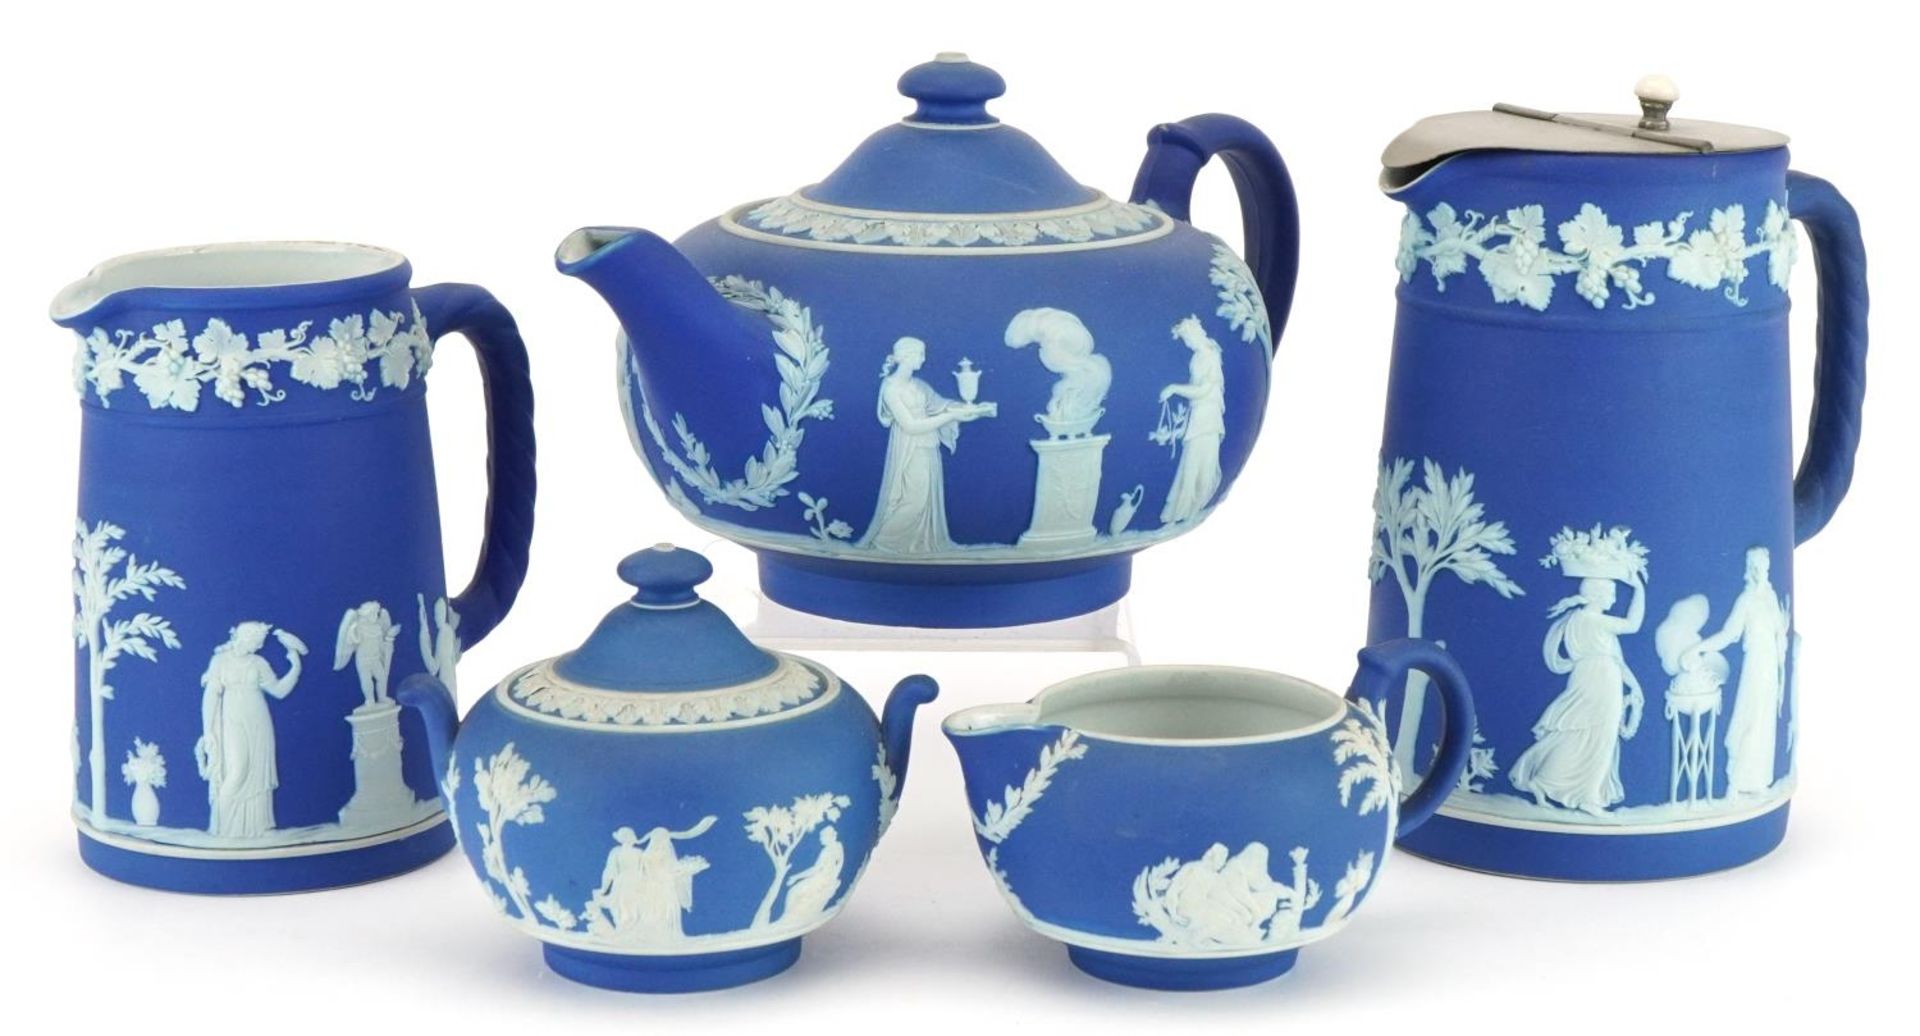 Wedgwood blue and white Jasperware decorated with classical Grecian females and Putti including